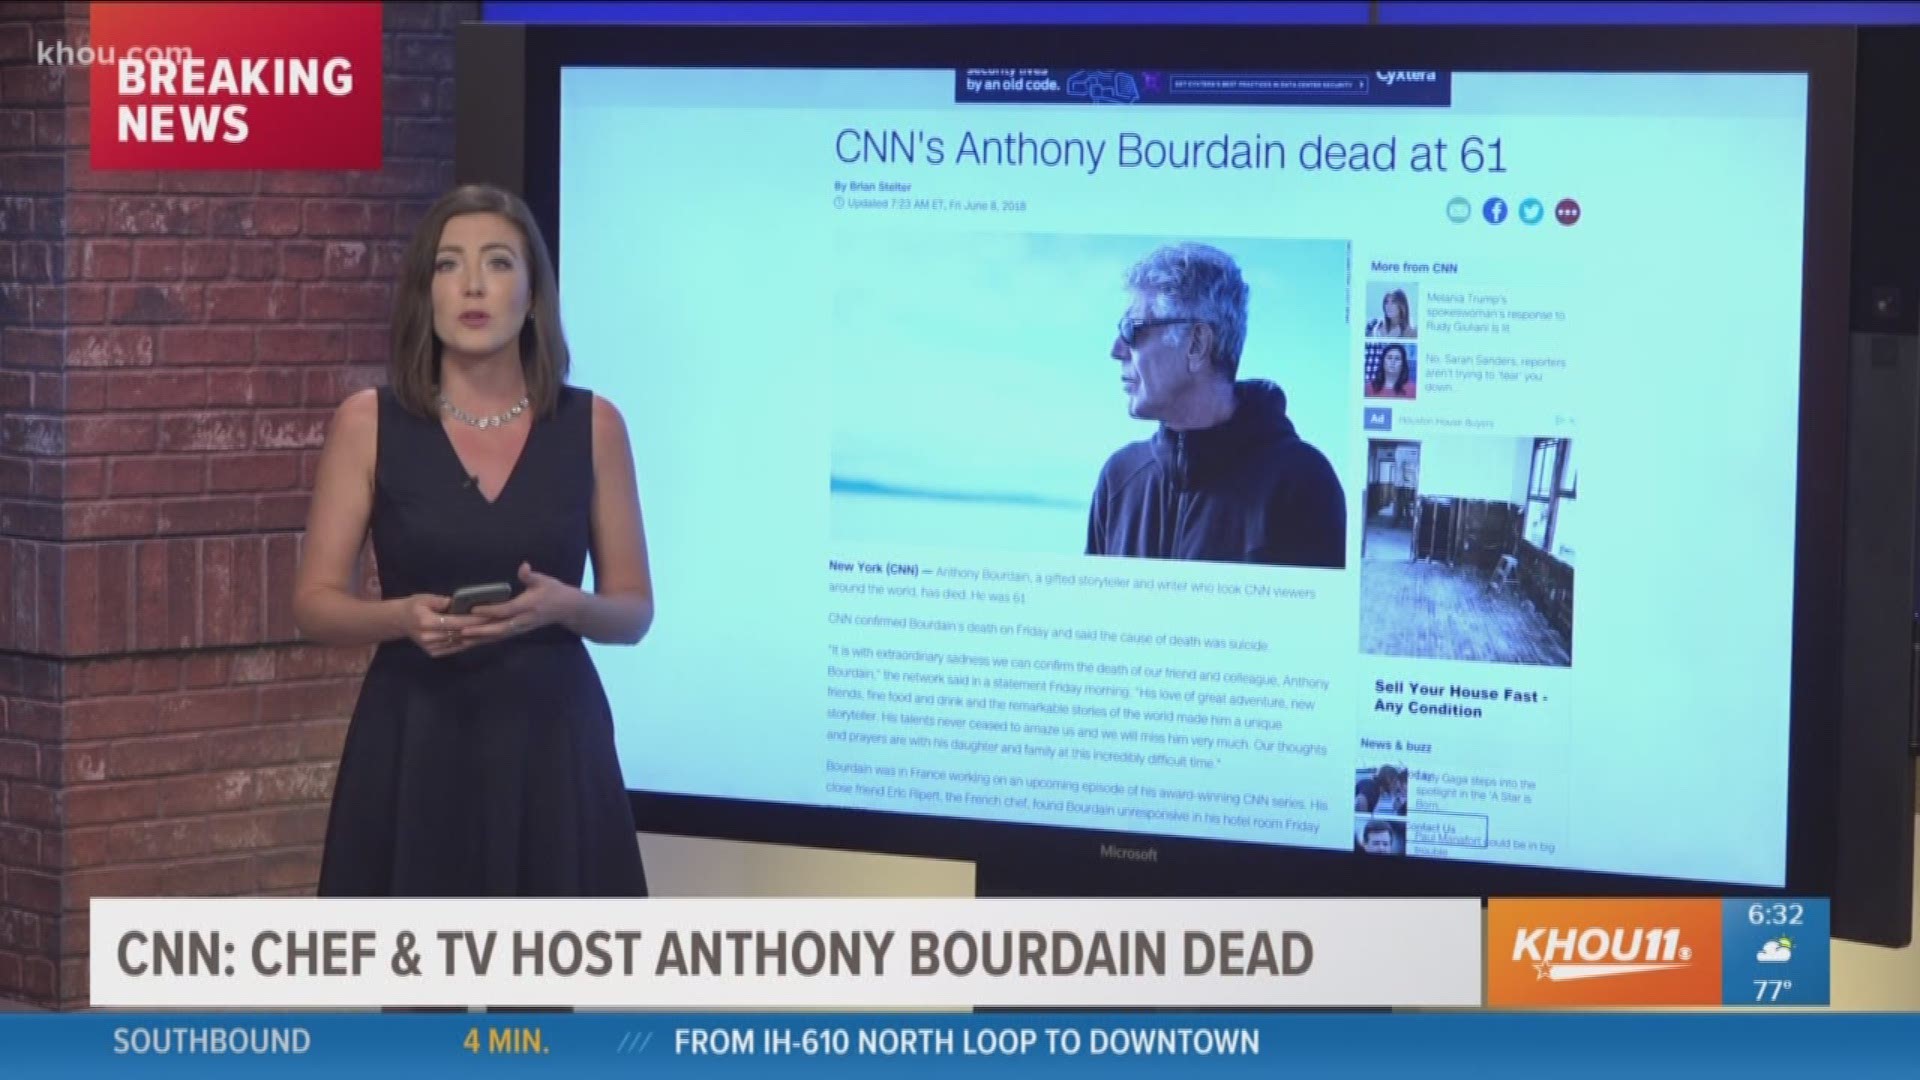 Anthony Bourdain of CNN's "Parts Unknown" is dead. The chef, storyteller and Emmy-winning host has committed suicide at age 61, CNN confirms.